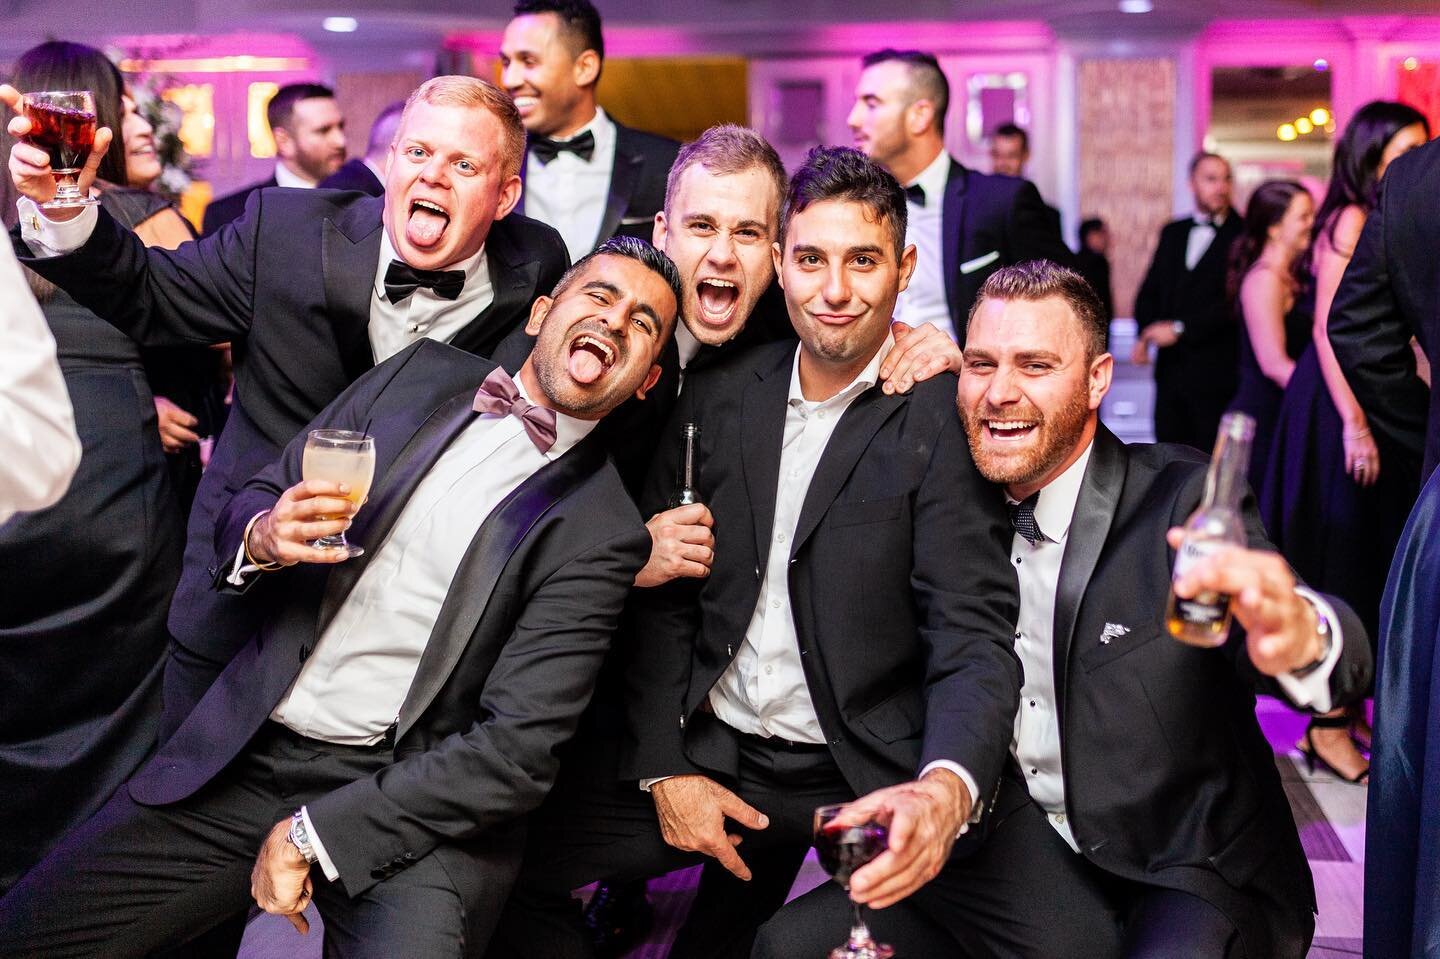 What&rsquo;s my favorite part of the wedding day? That&rsquo;s definitely a tough call. But I mean, between you and me, I think my favorite part is when the dance floor opens up! The vibes are always on point! 
.
.
.
.
#weddingreception #SaturdaysAre